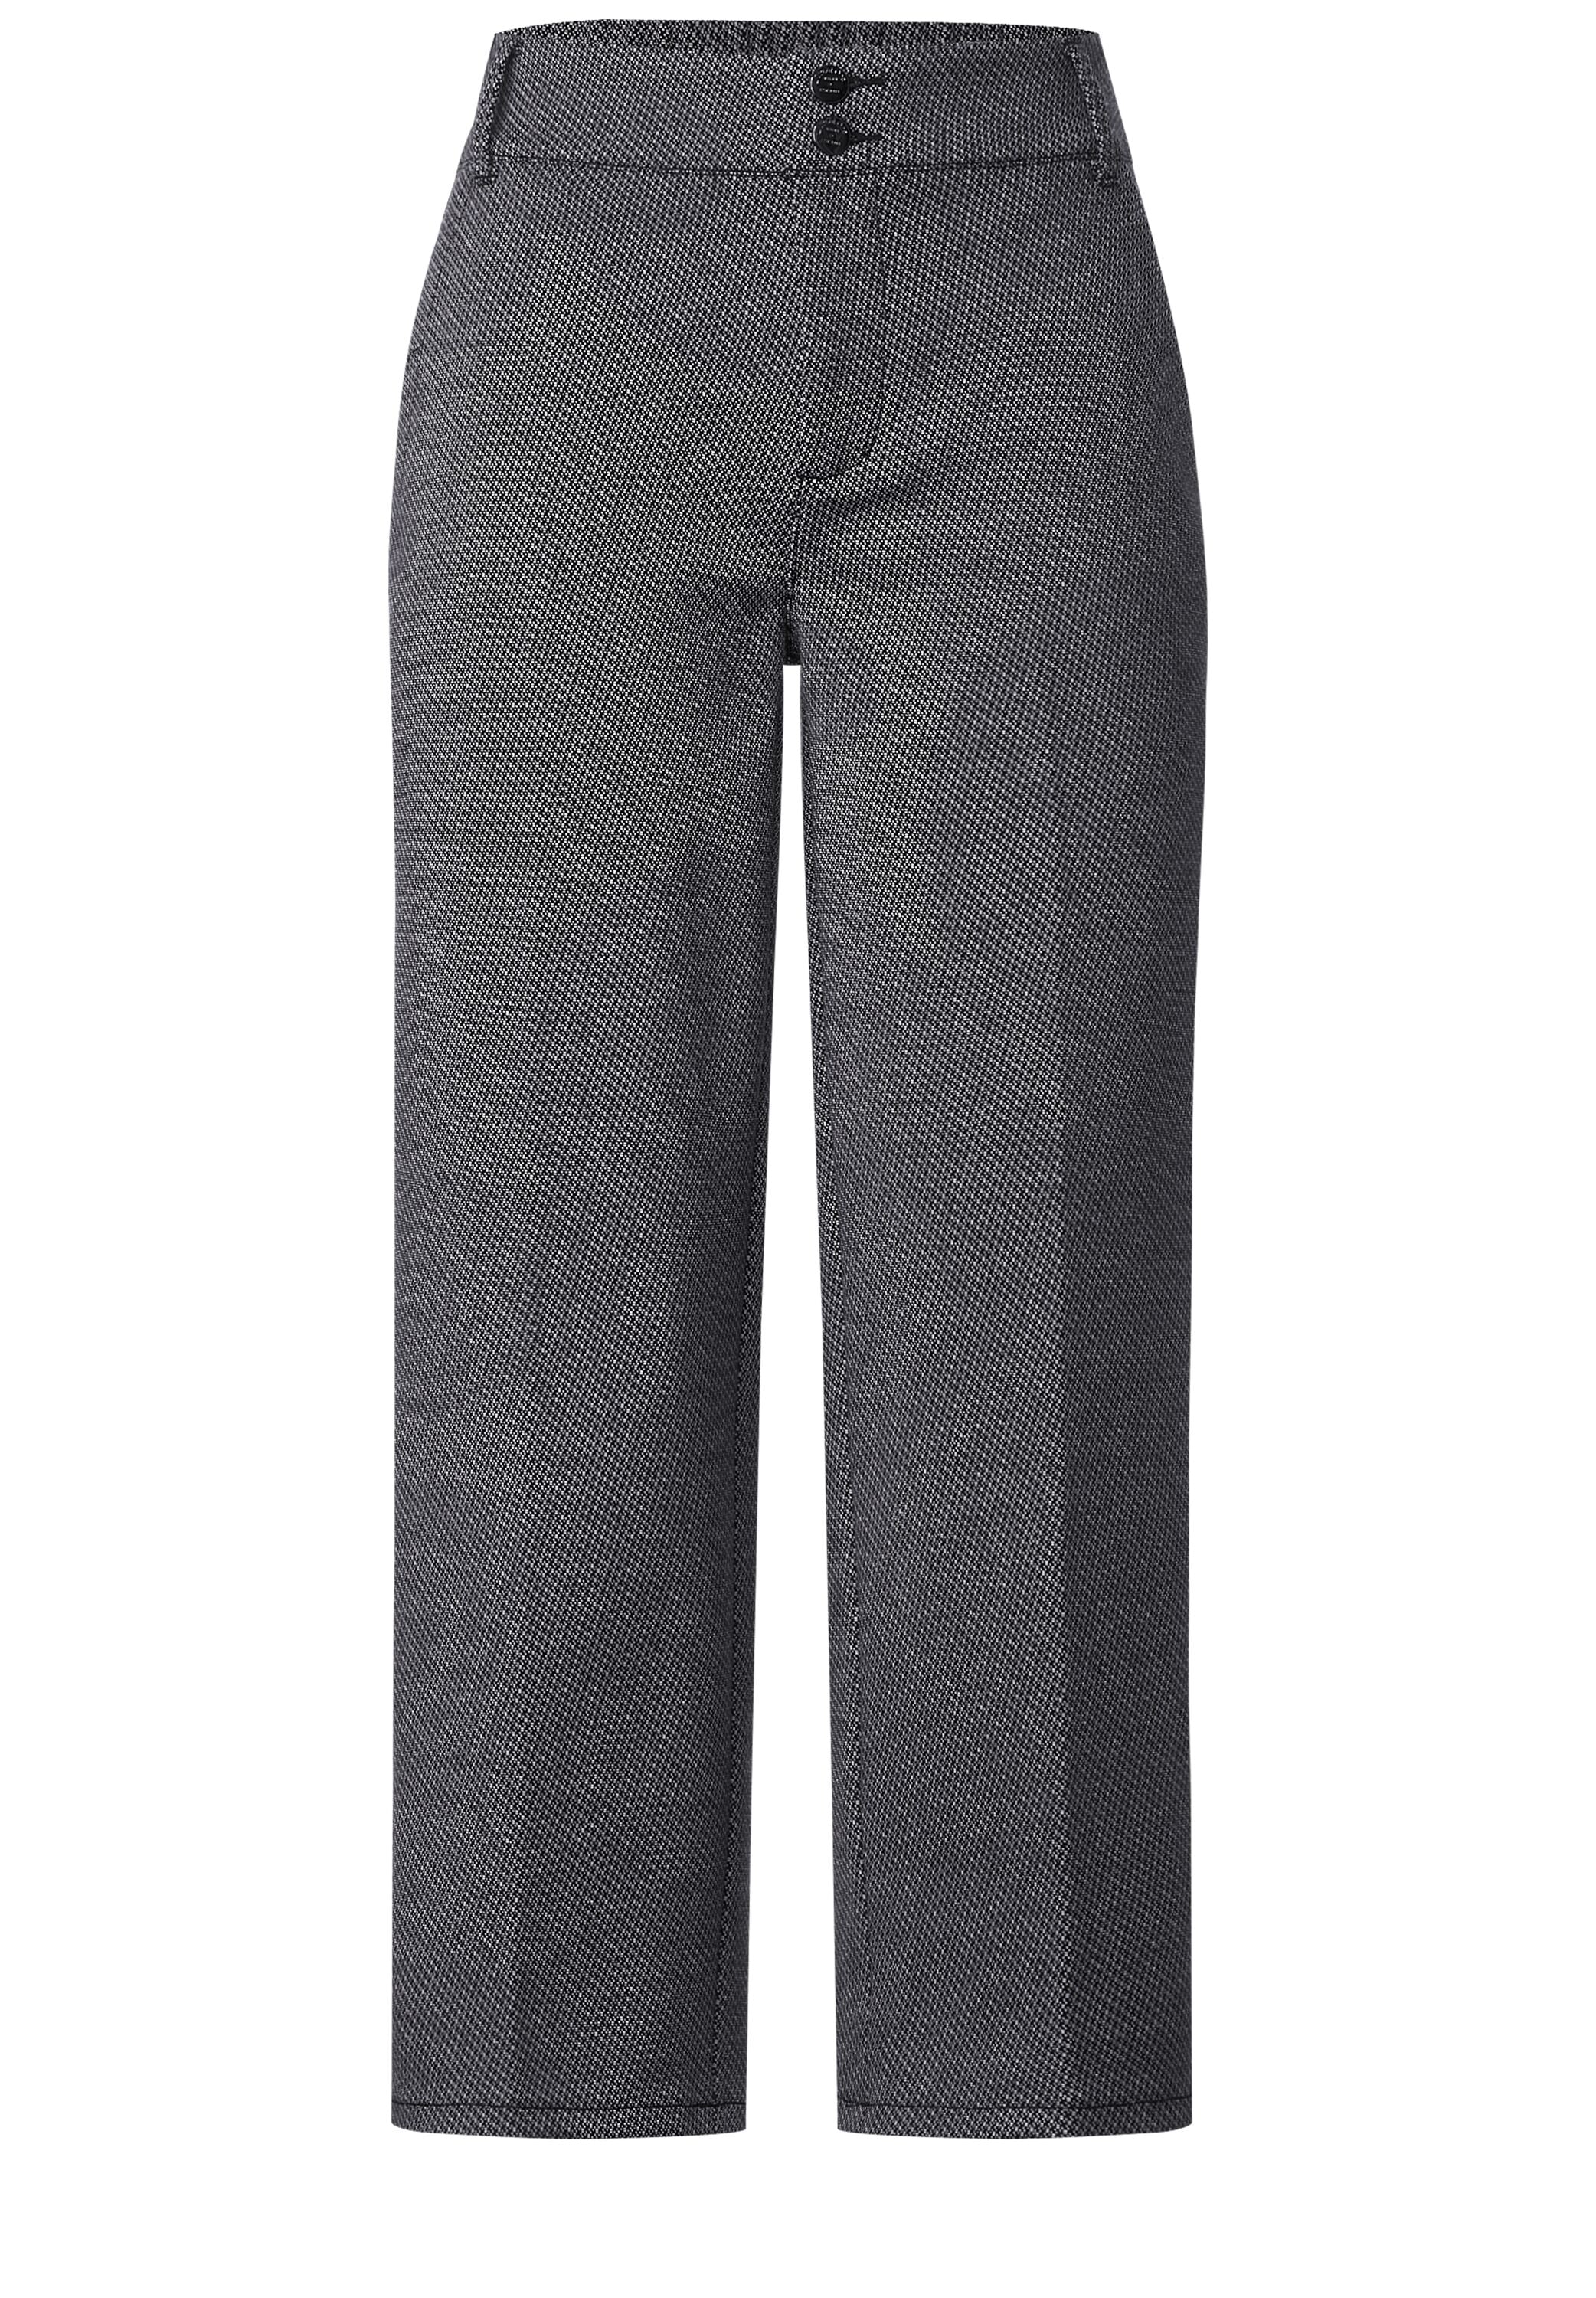 STREET ONE Stoffhose »Jacquard Casual Fit Hose«, Zweifarbiges Jacquard-Muster